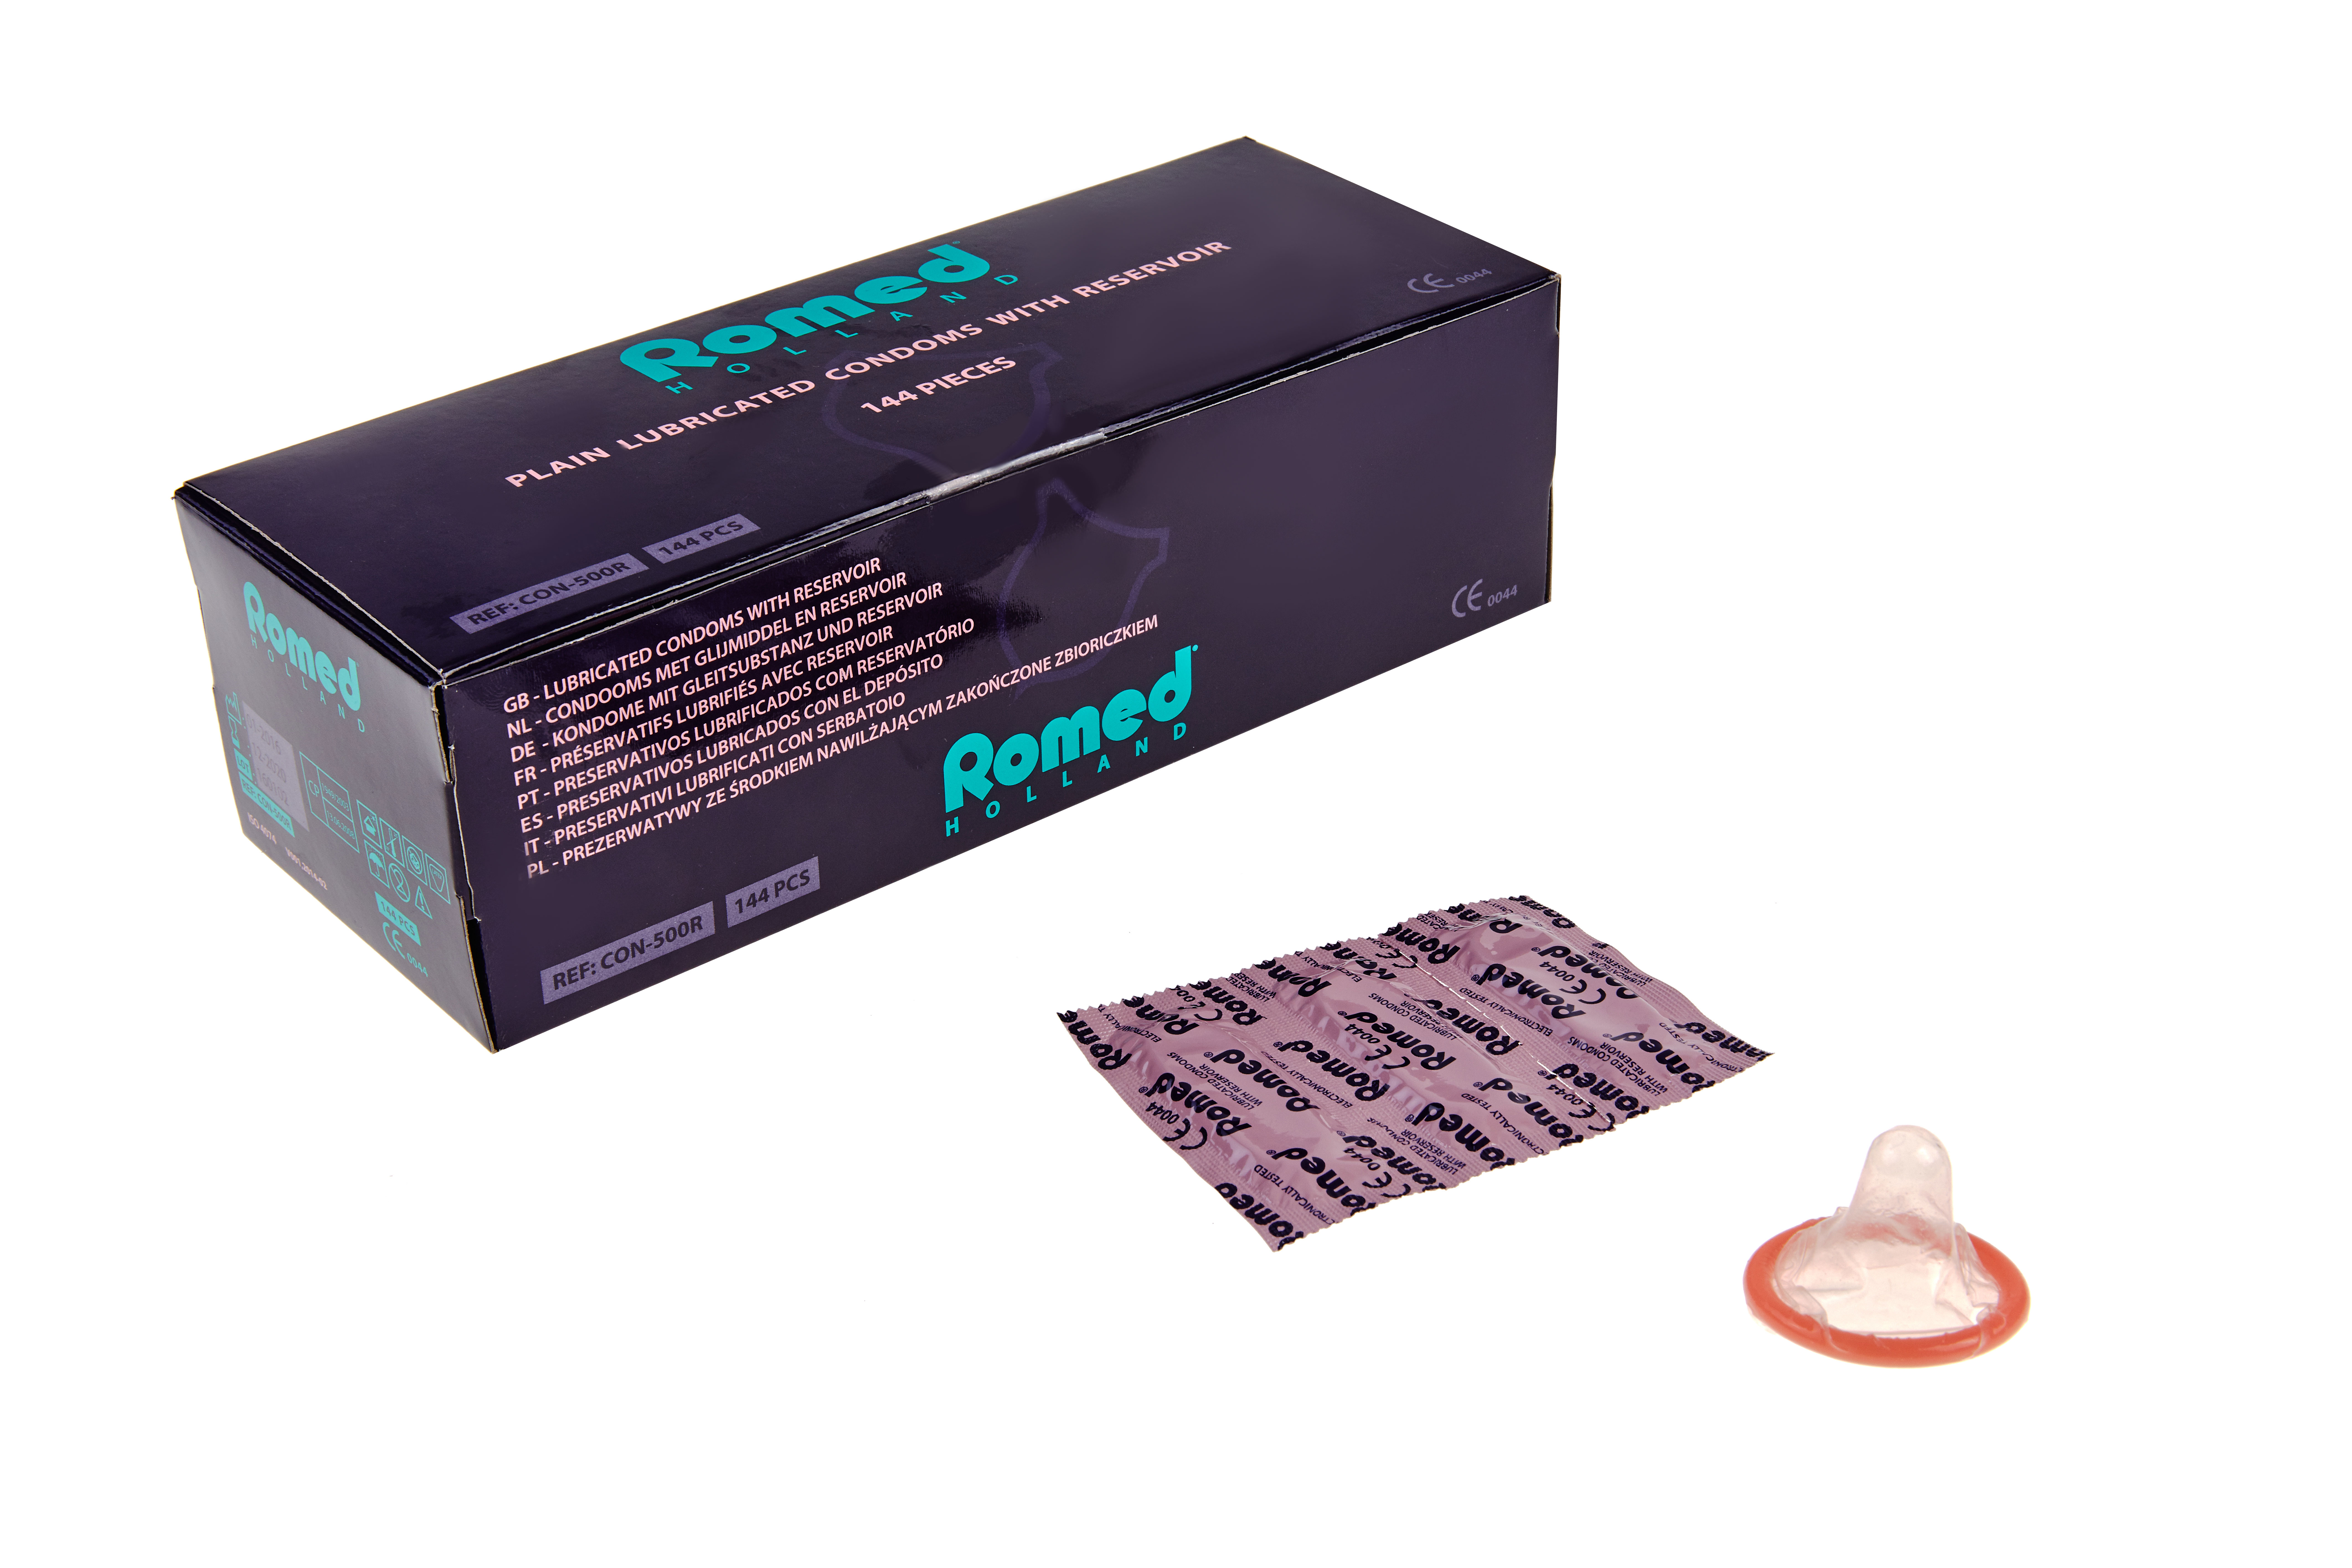 CON-500R Romed condoms packed in strips of 3 pcs, 48 strips of 3 pcs = 144 pcs in an inner box (= 1 gross), 50 x 144 pcs = 7.200 pcs in a carton.